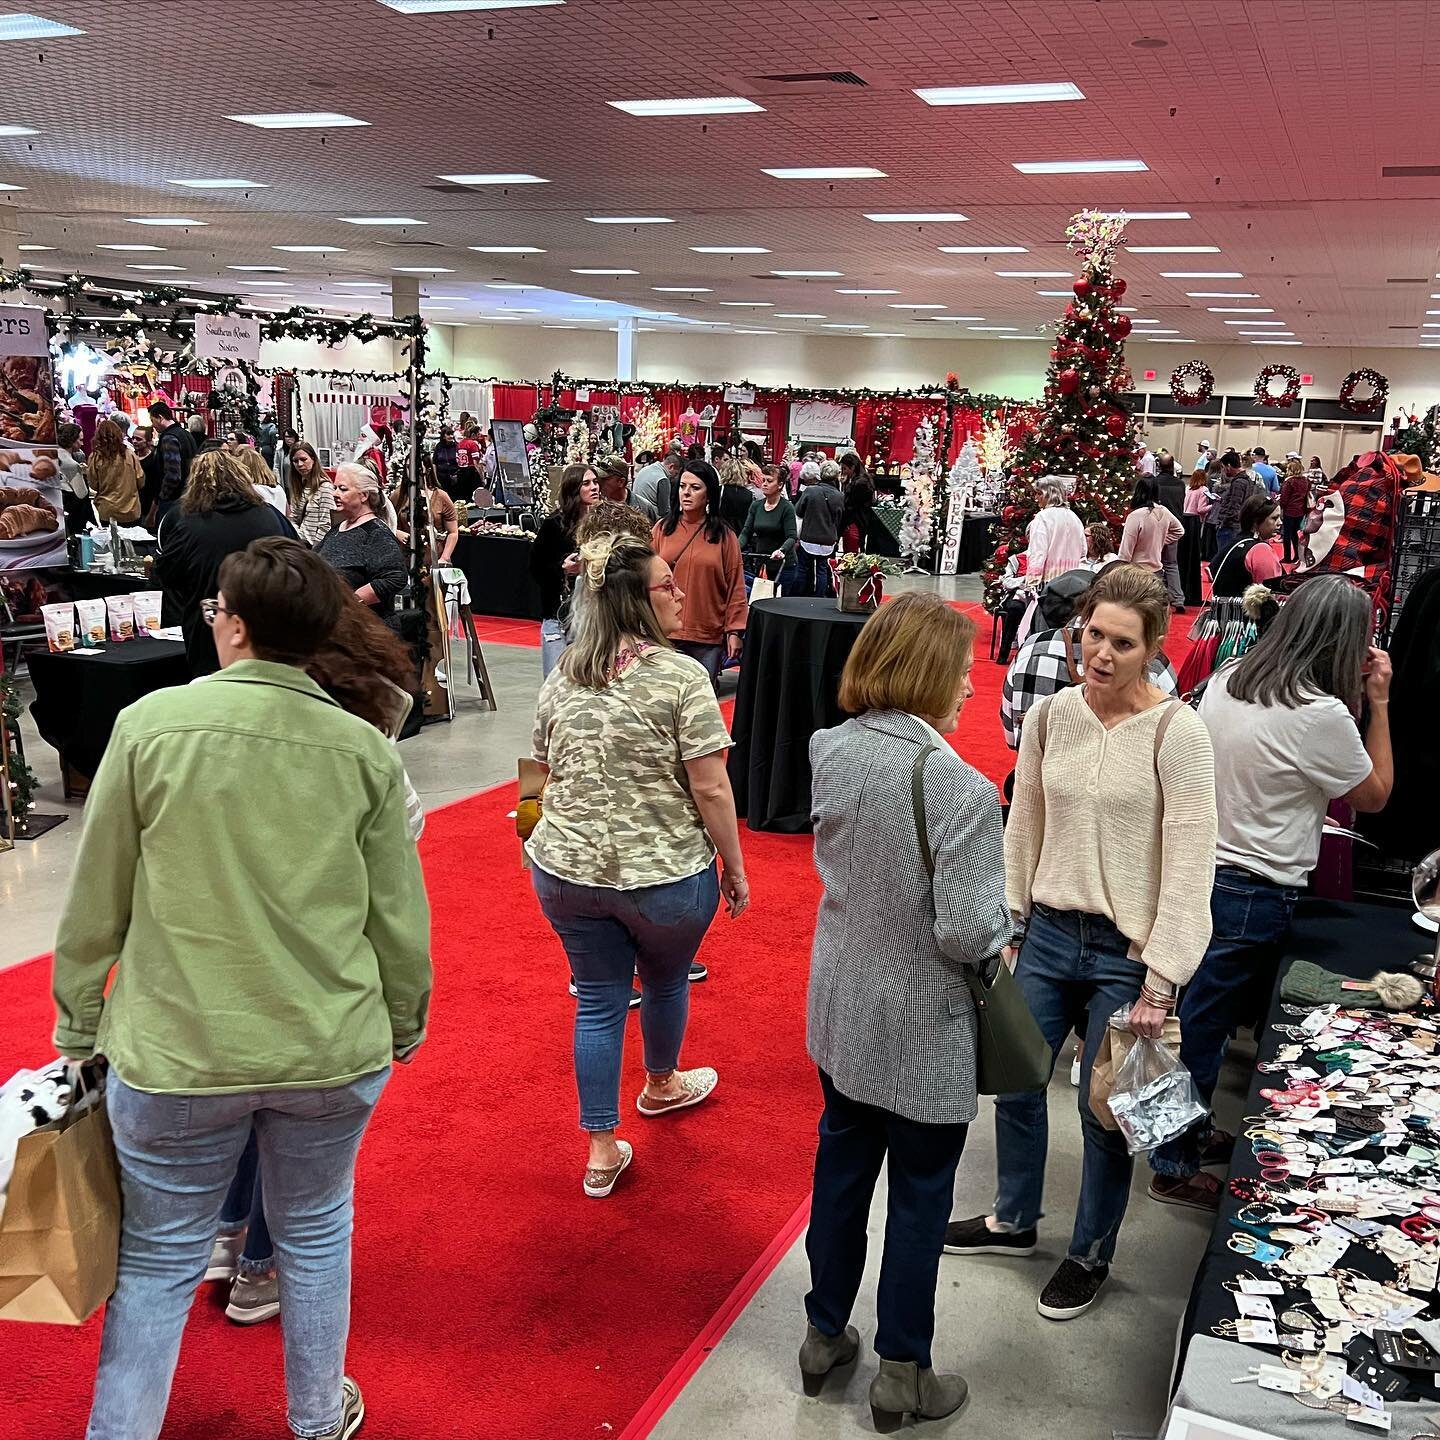 North Pole &amp; South Pole are full of wonderful vendors who are ready for you to come shop! Tickets are sold at the ticket booth.